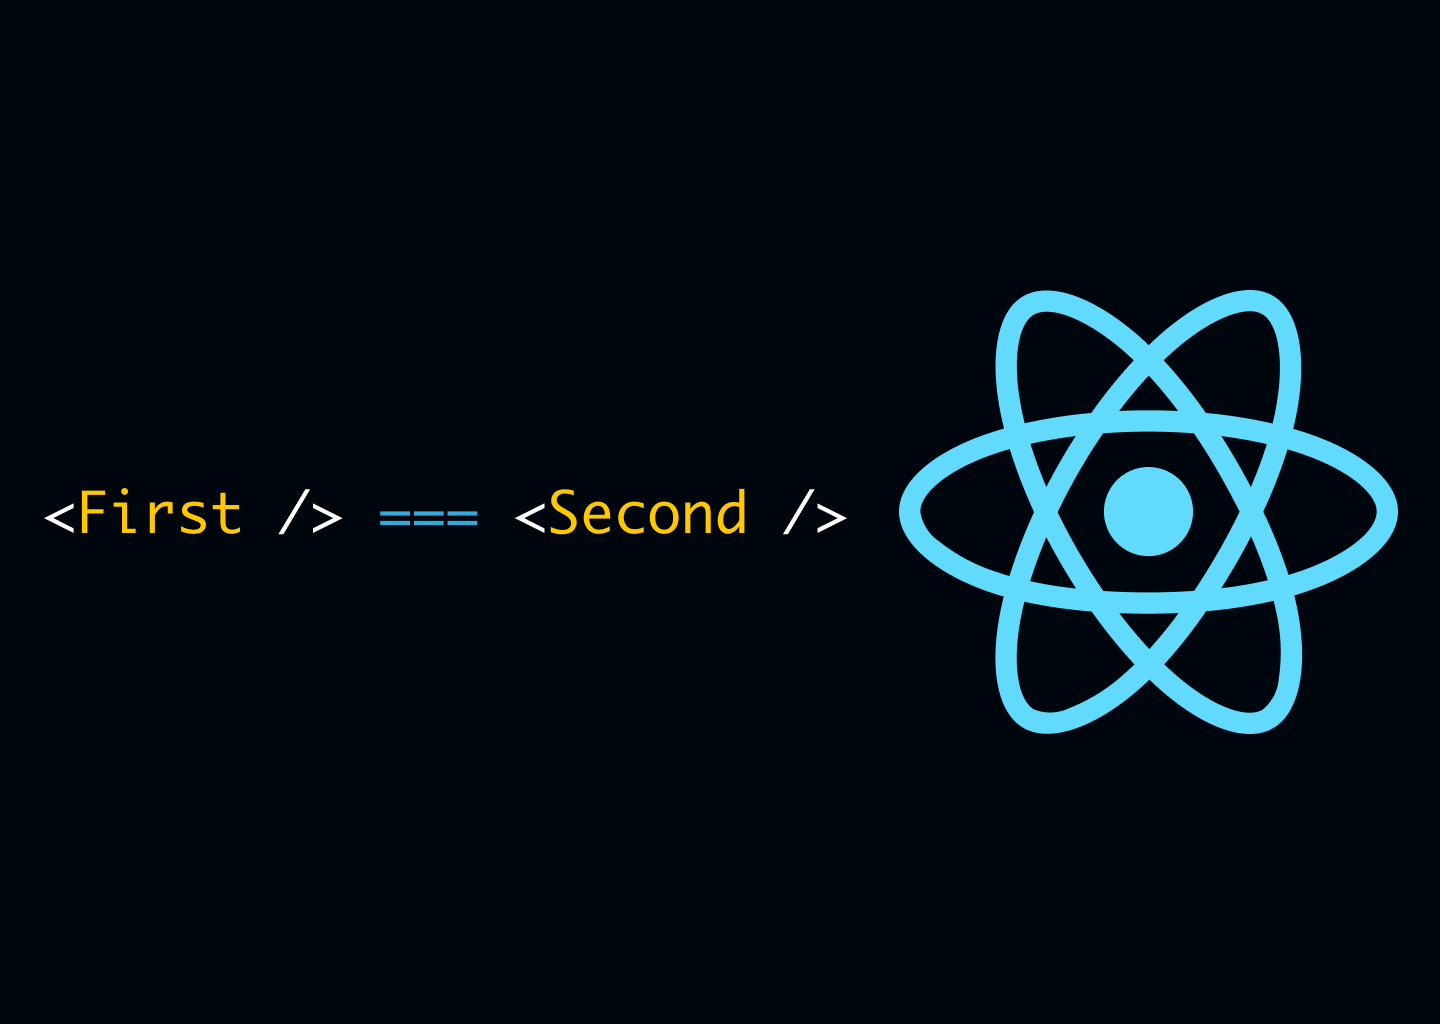 Image of React logo with next to a chunk of react code